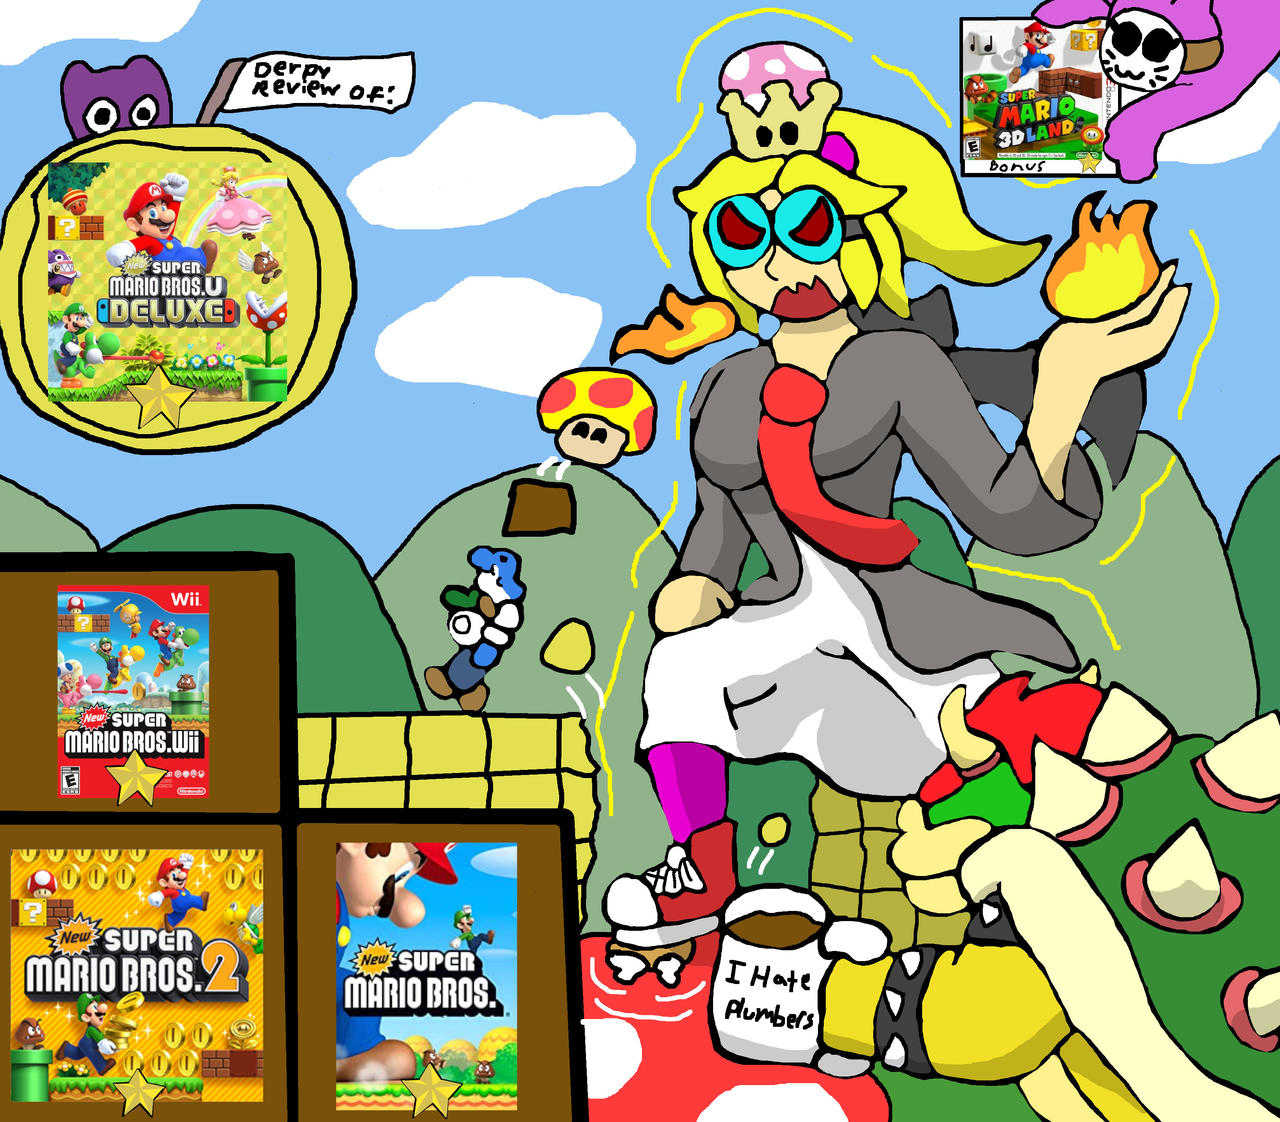 Derpy Review #84 New Super Mario Bros series by MicroGamer1 on DeviantArt